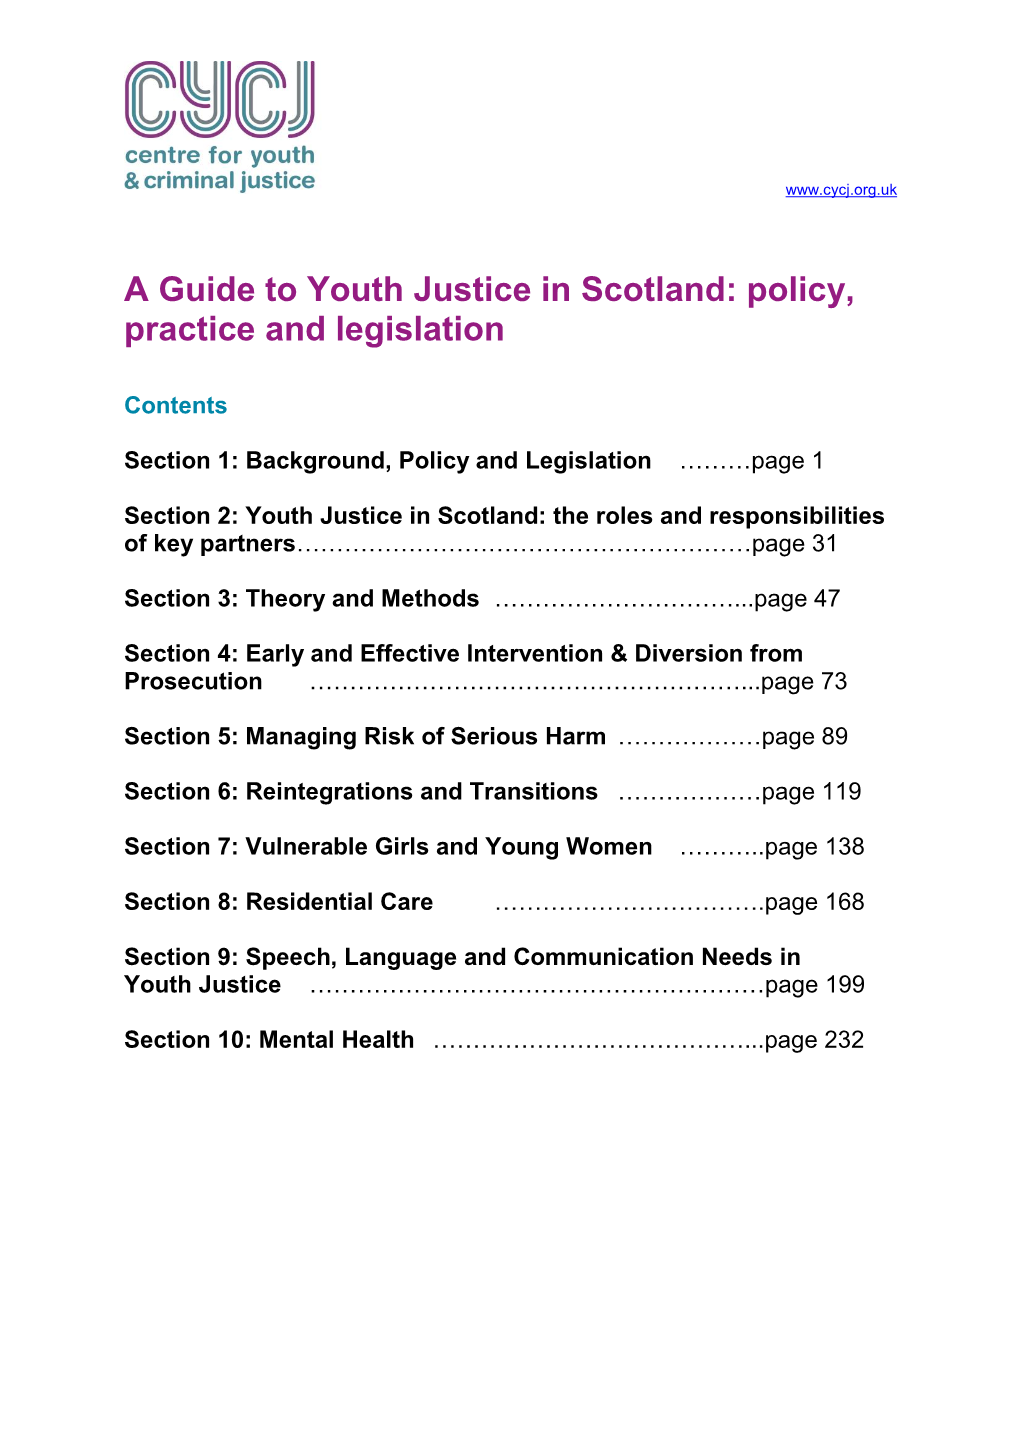 A Guide to Youth Justice in Scotland: Policy, Practice and Legislation